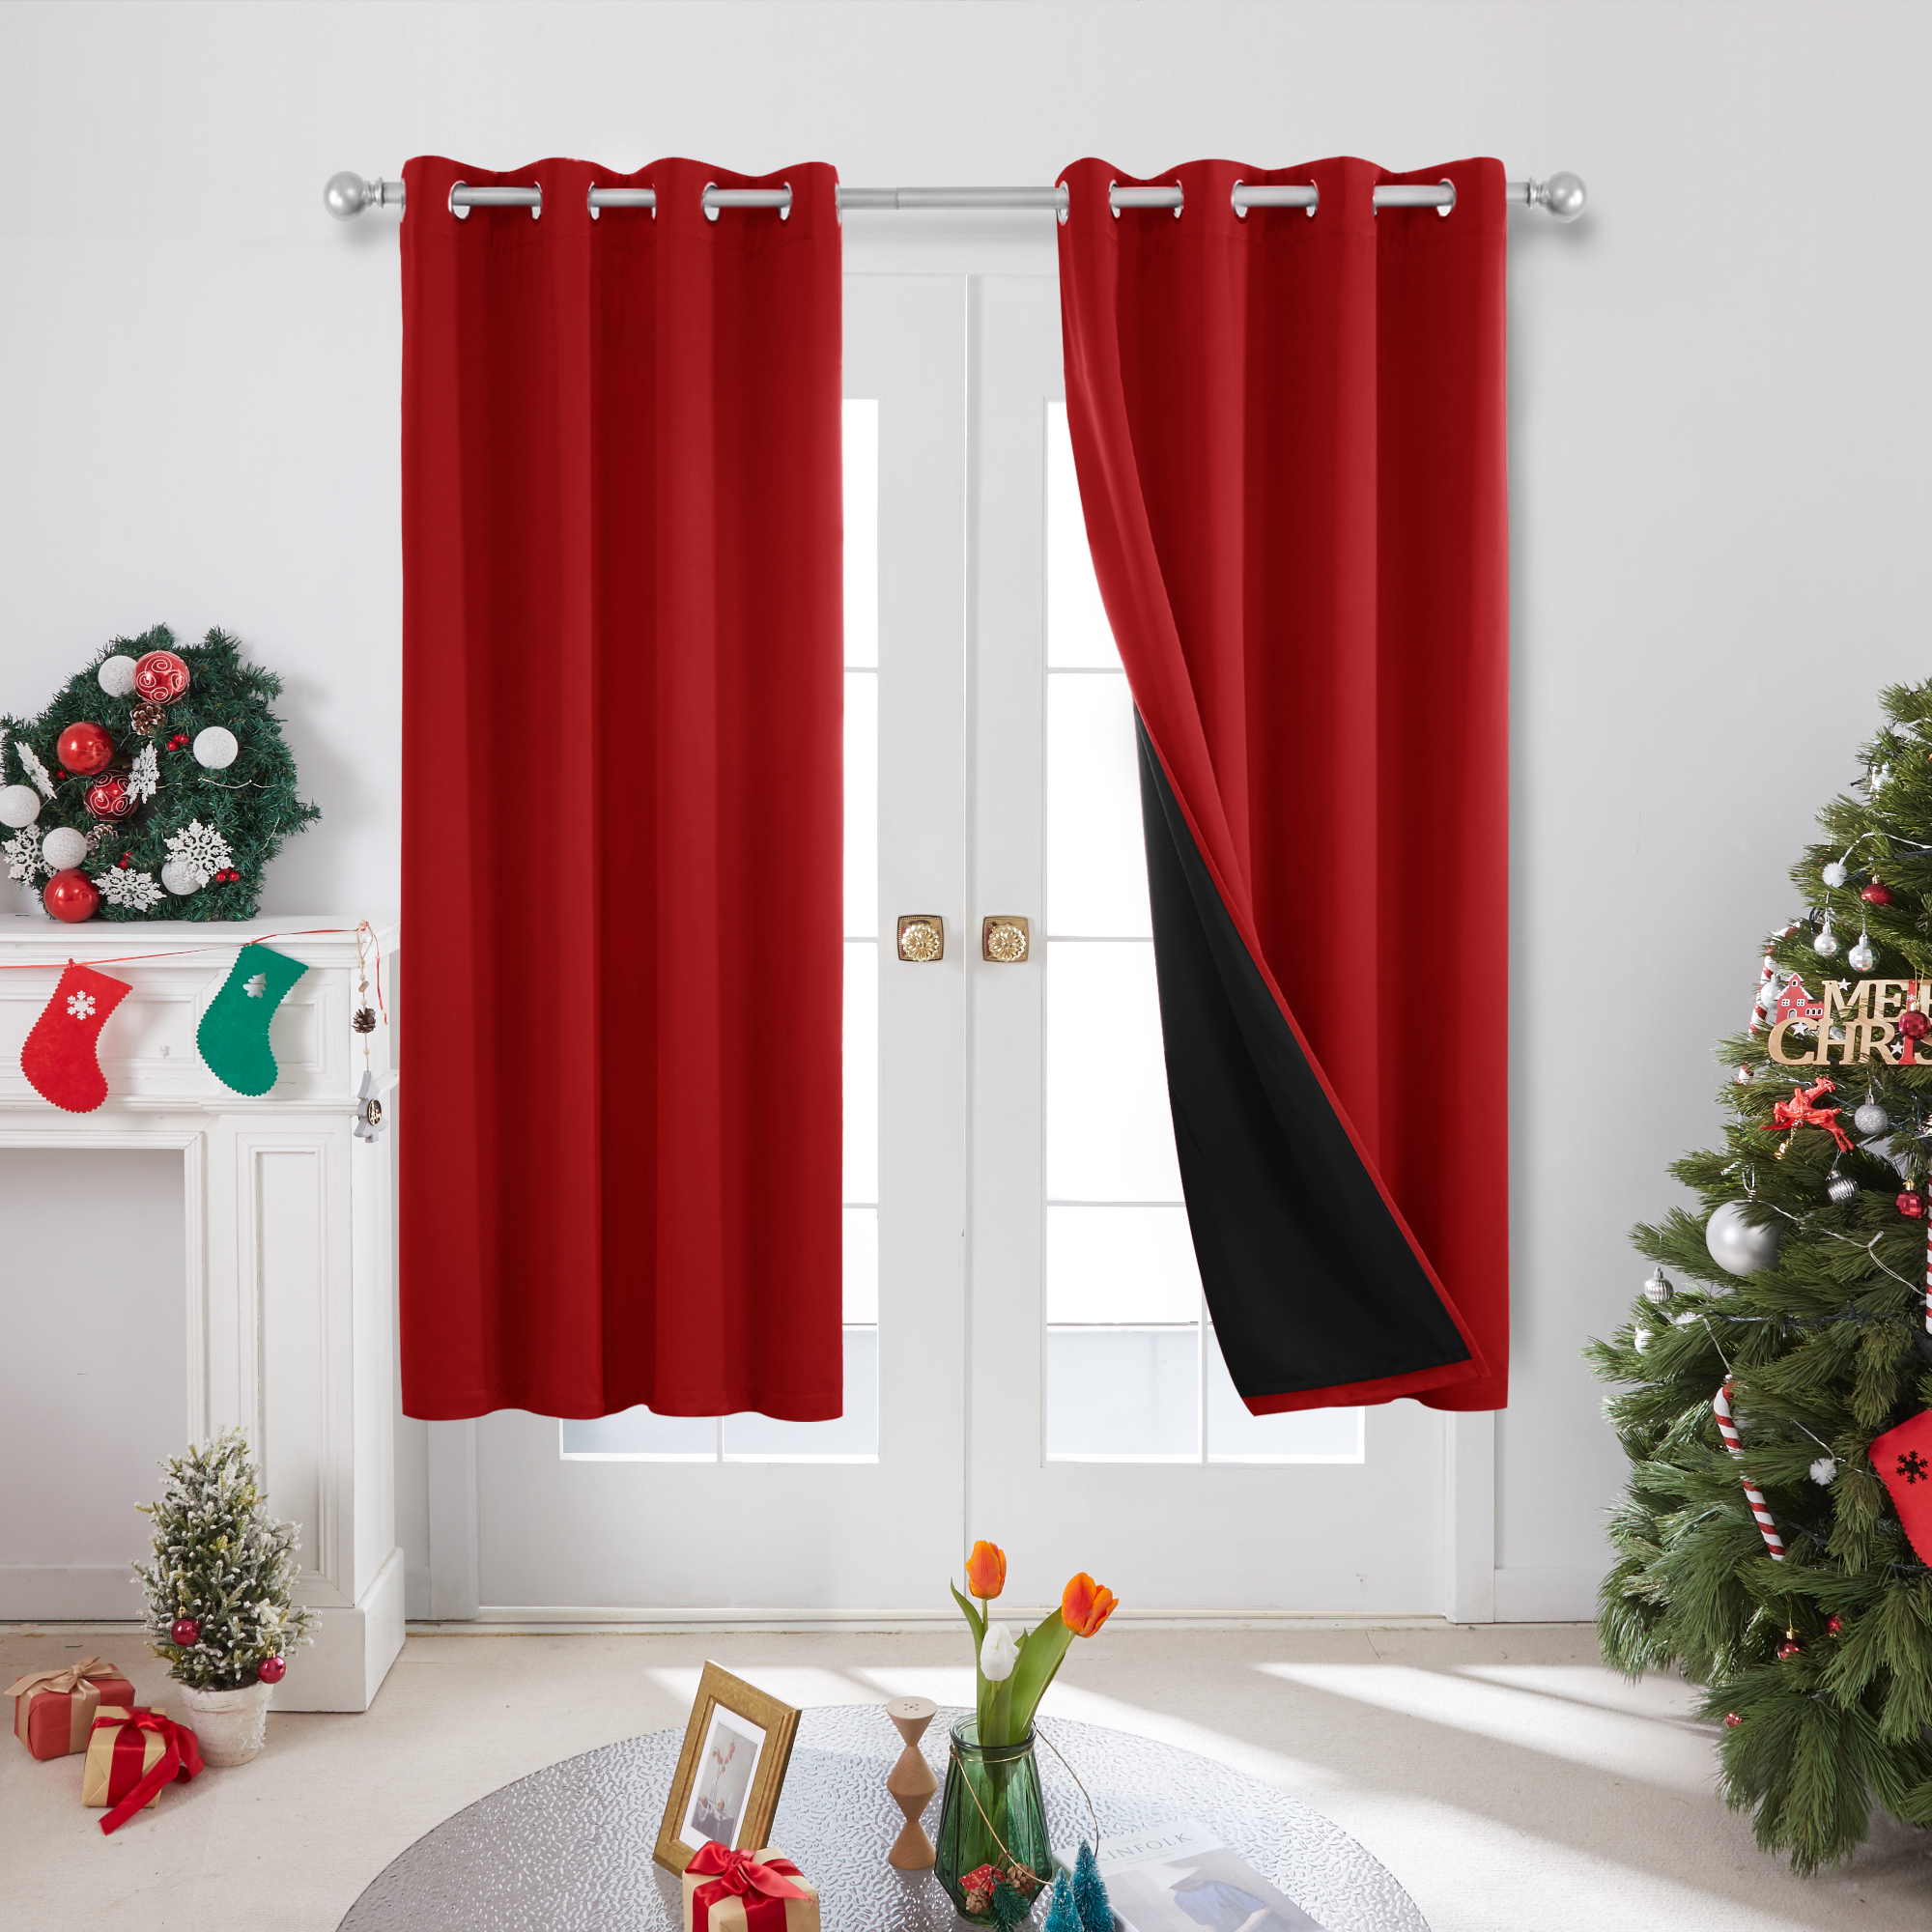 Deconovo Double Layer 100% Blackout Curtains 2 Panels (6 colors) -$11.40 + Free Shipping w/ Prime